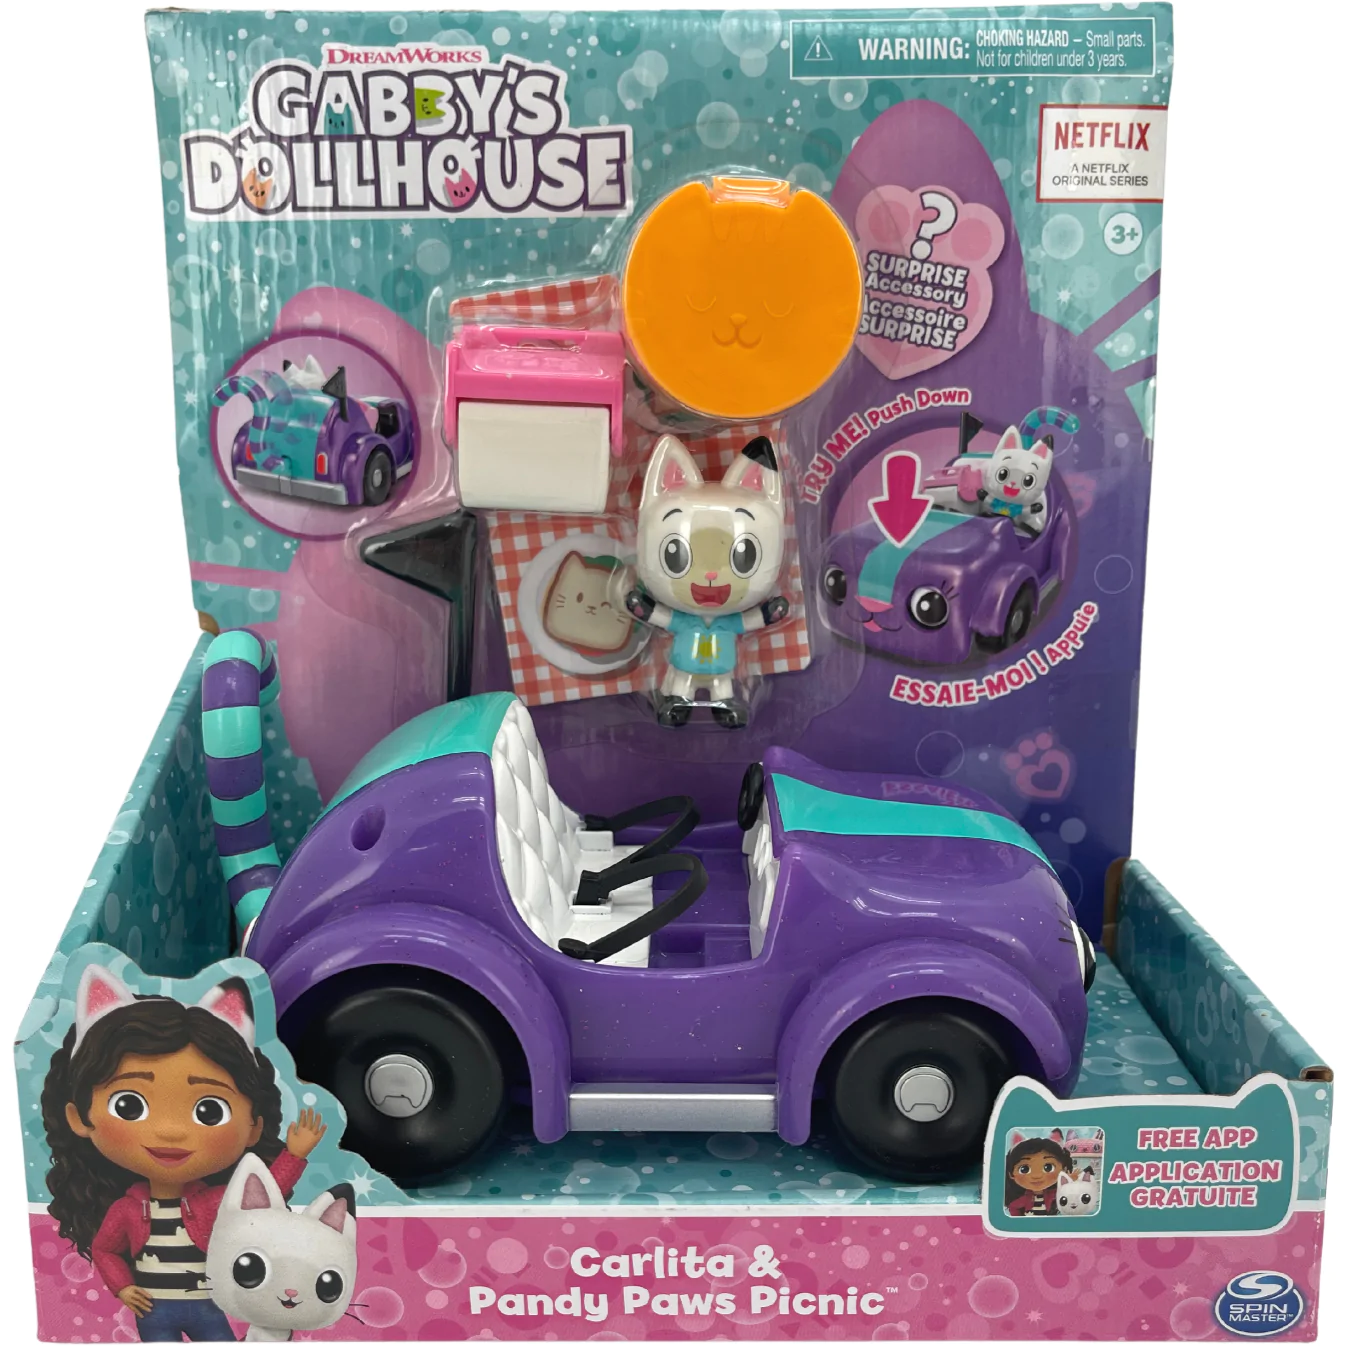 DreamWorks Gabby's Dollhouse Calita & Pandy Paws Picnic Set / With Surprise Accessory